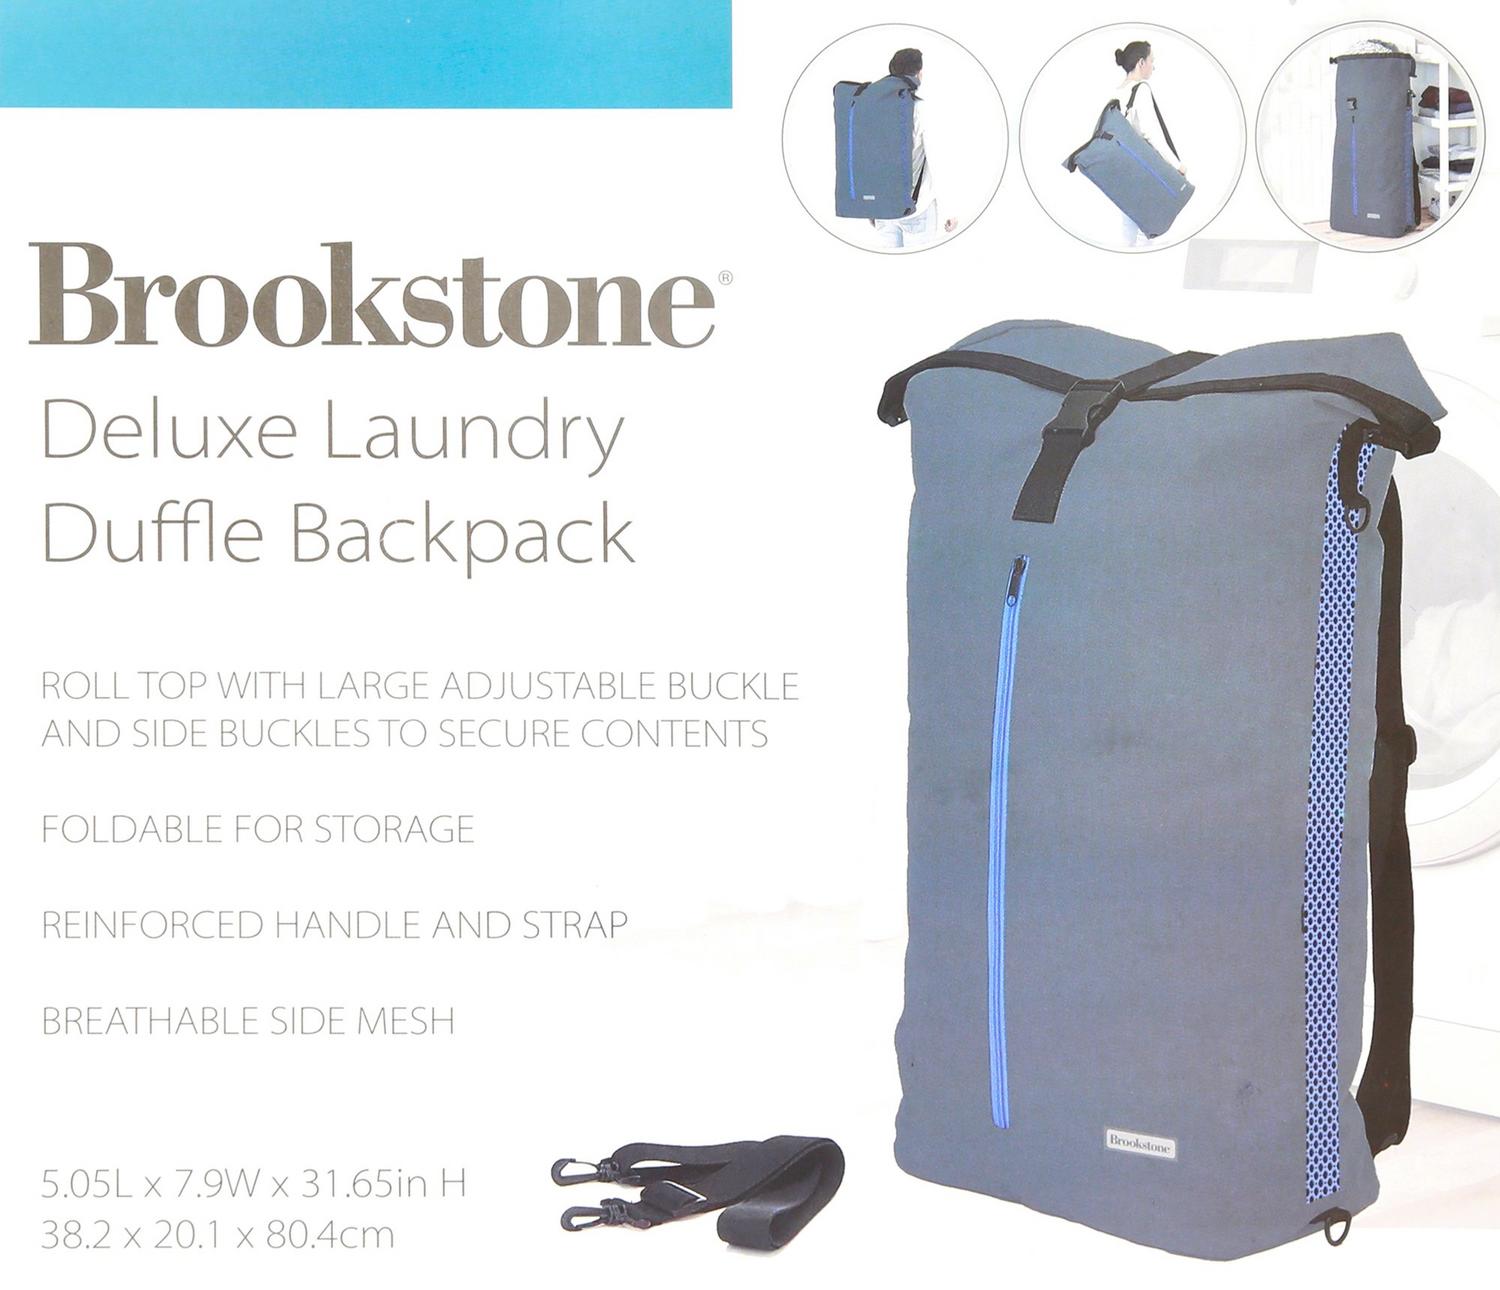 Brookstone Deluxe Laundry Duffle Backpack